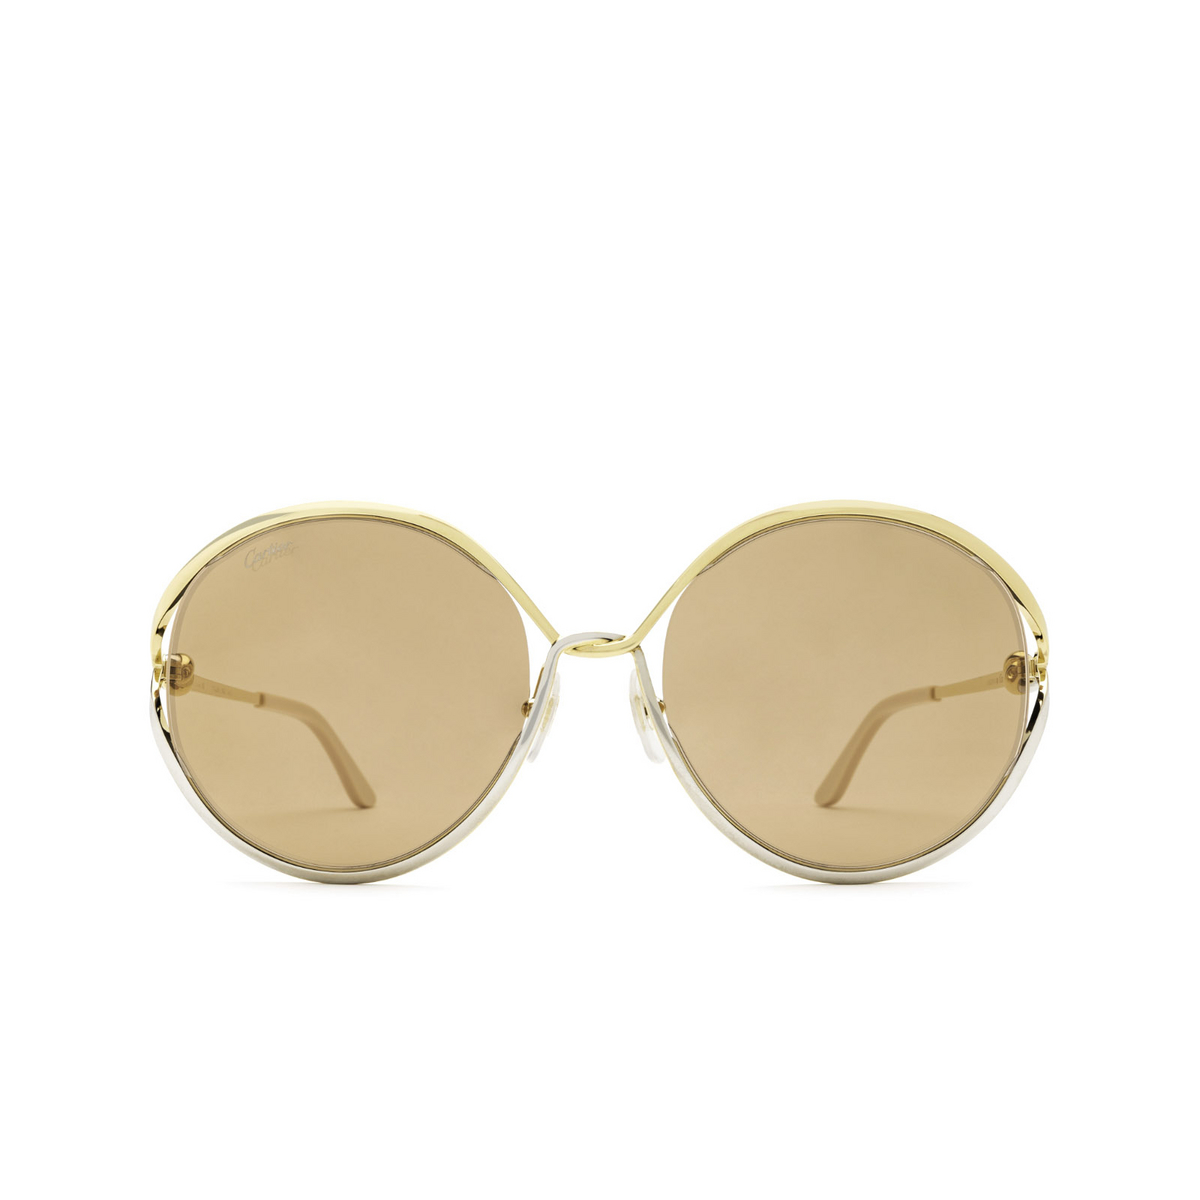 Cartier® Round Sunglasses: CT0226S color 002 Gold - front view